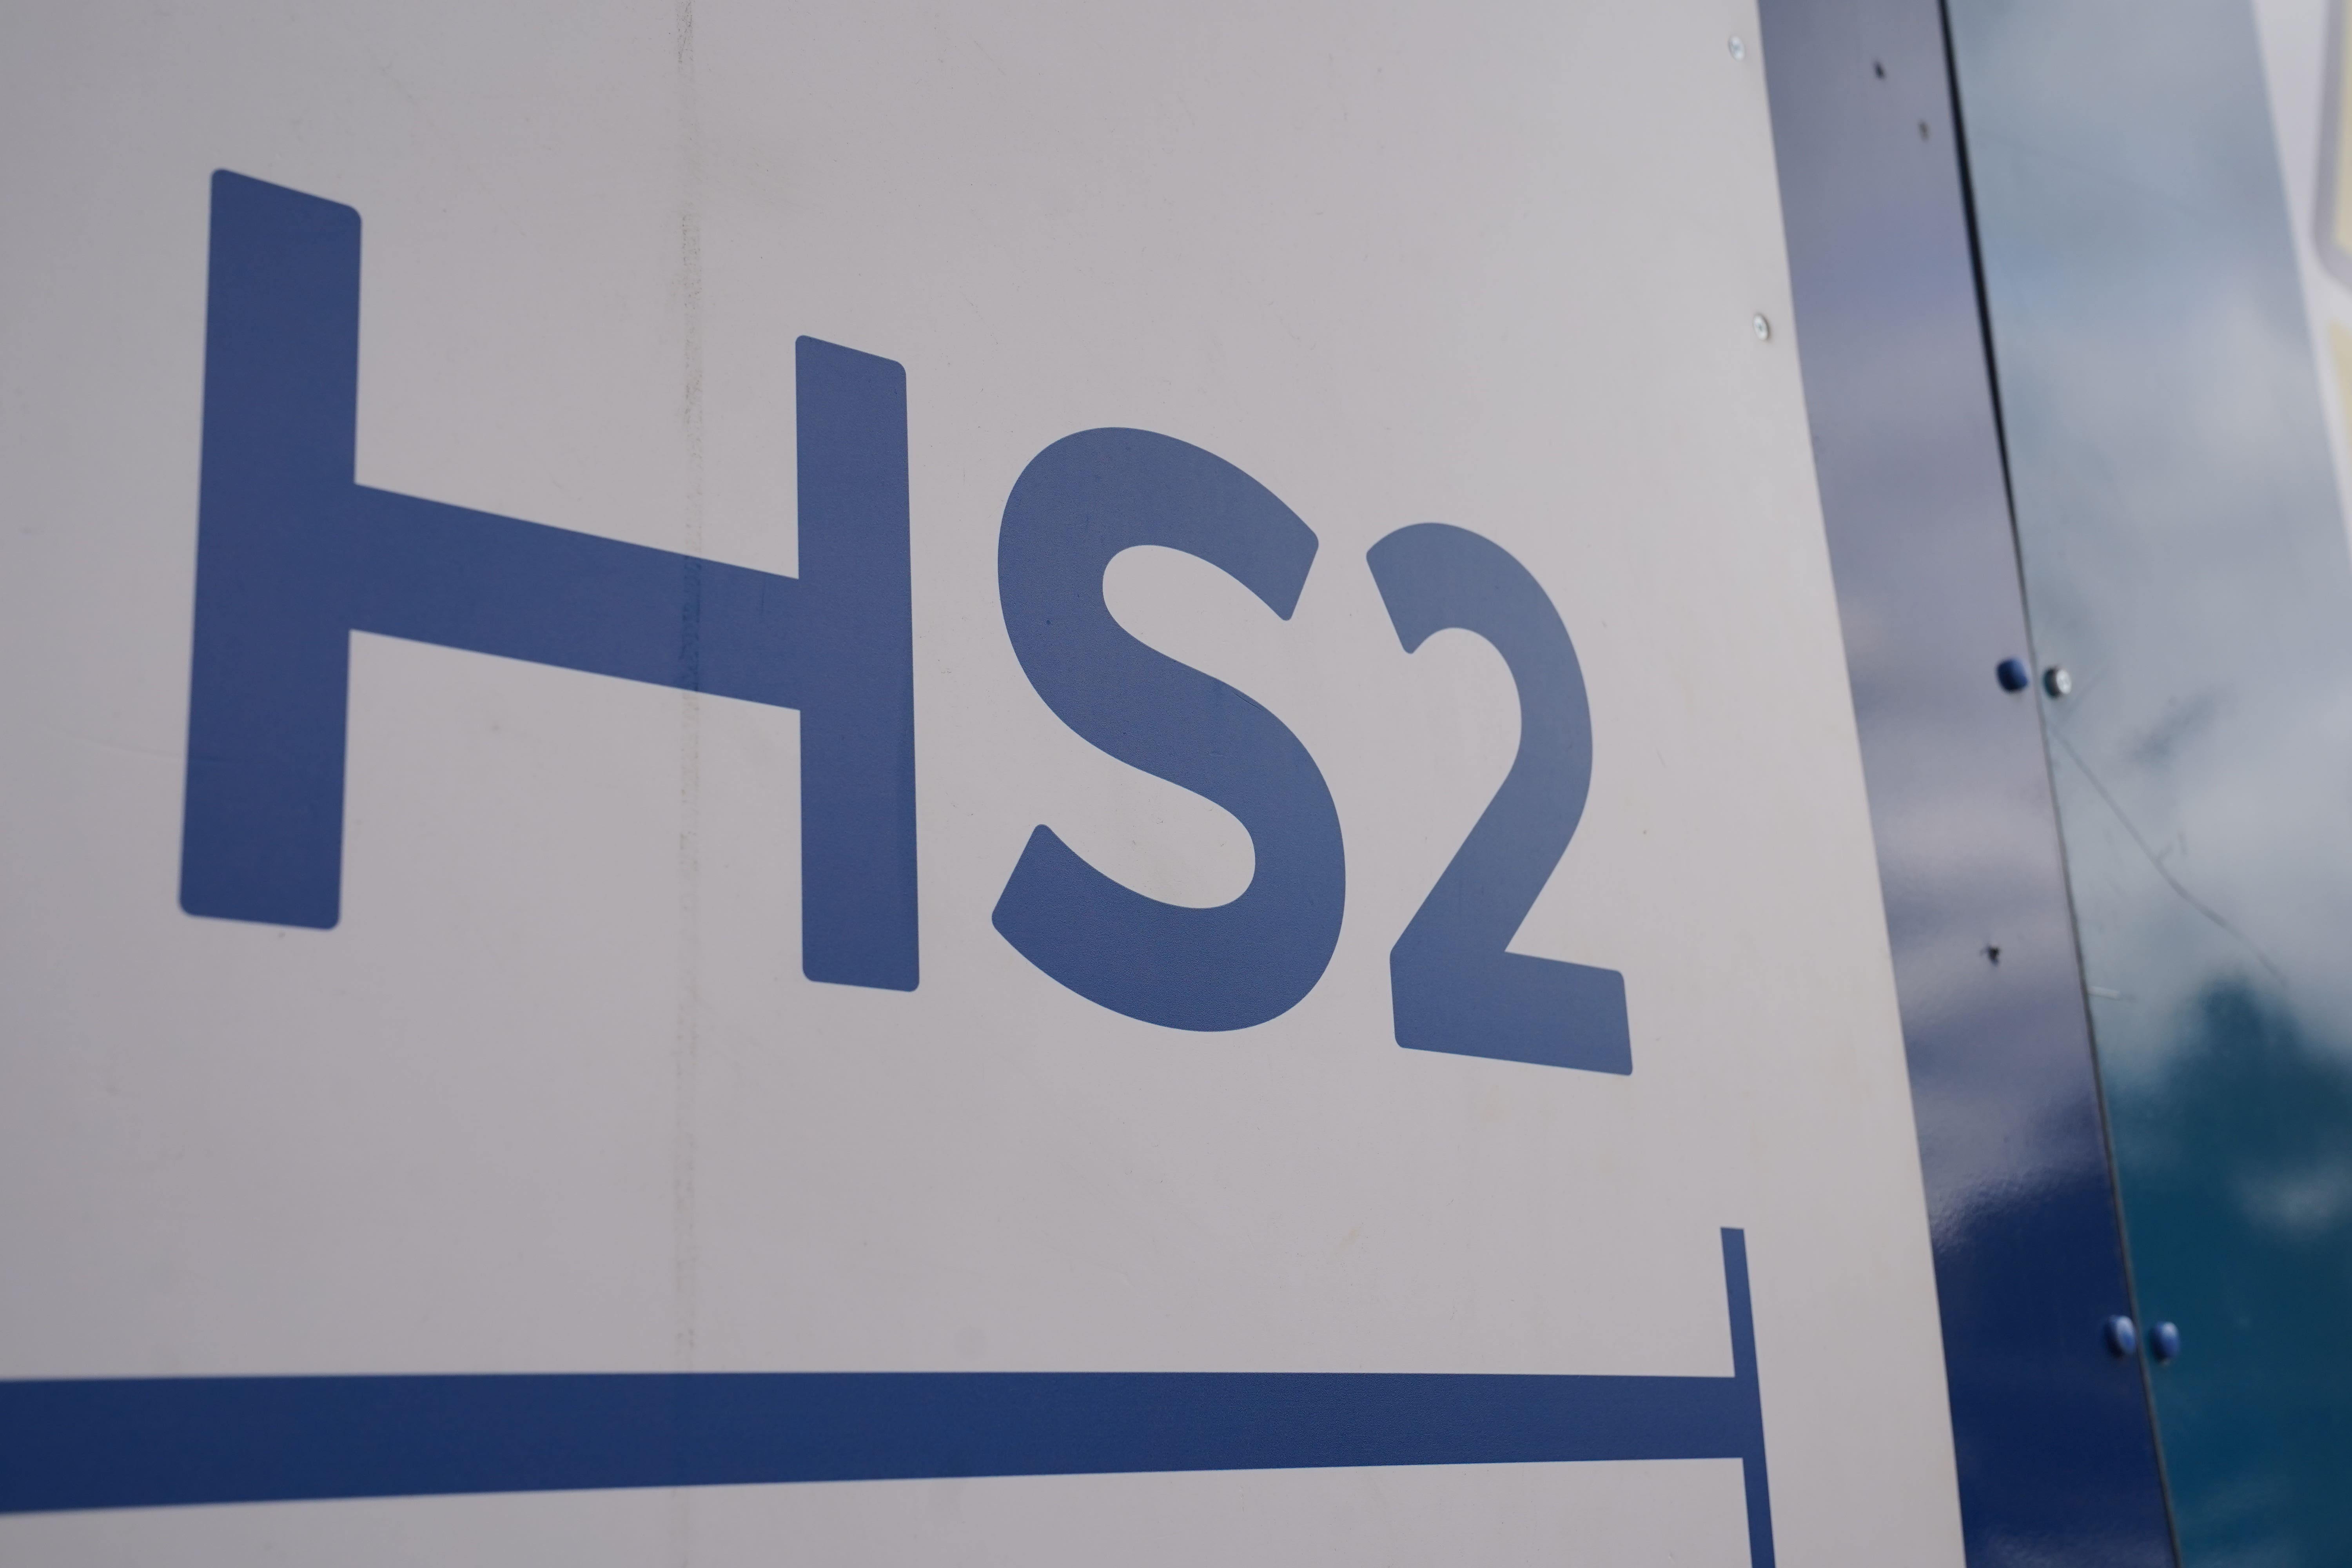 A plan to revive parts of the northern stretch of HS2 are back on track, according to government officials